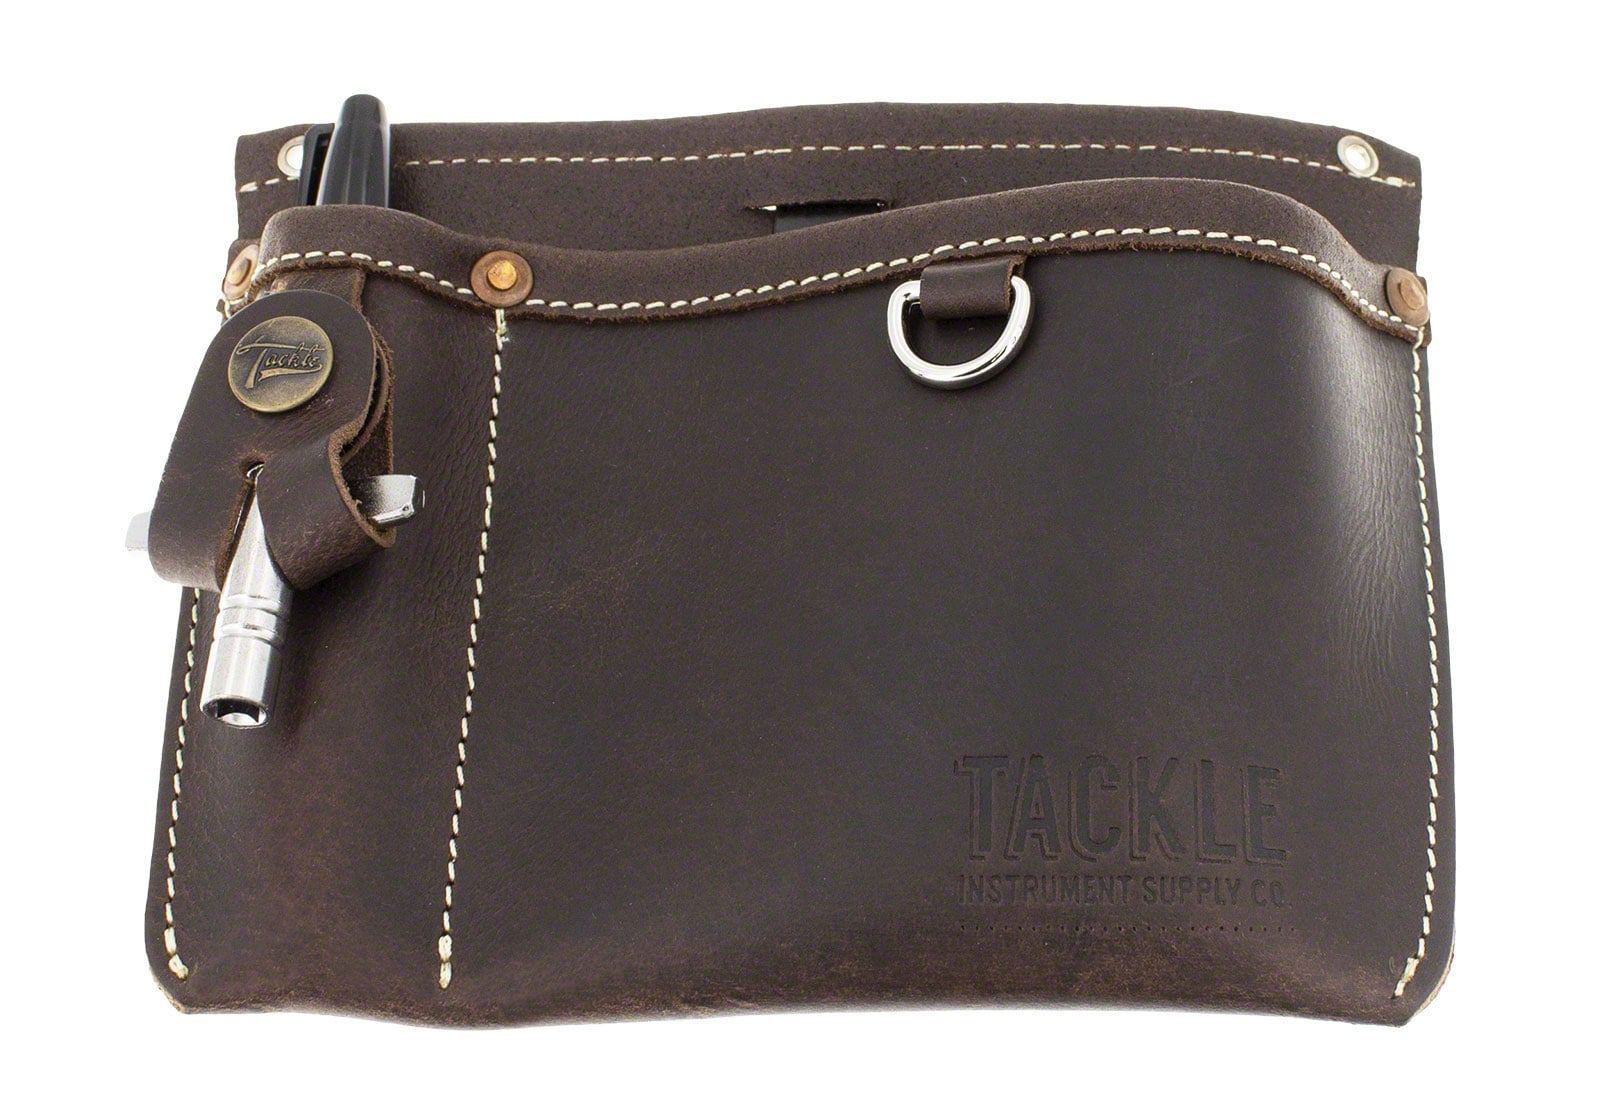 TACKLE INSTRUMENTS LEATHER UTILITY POUCH - BROWN